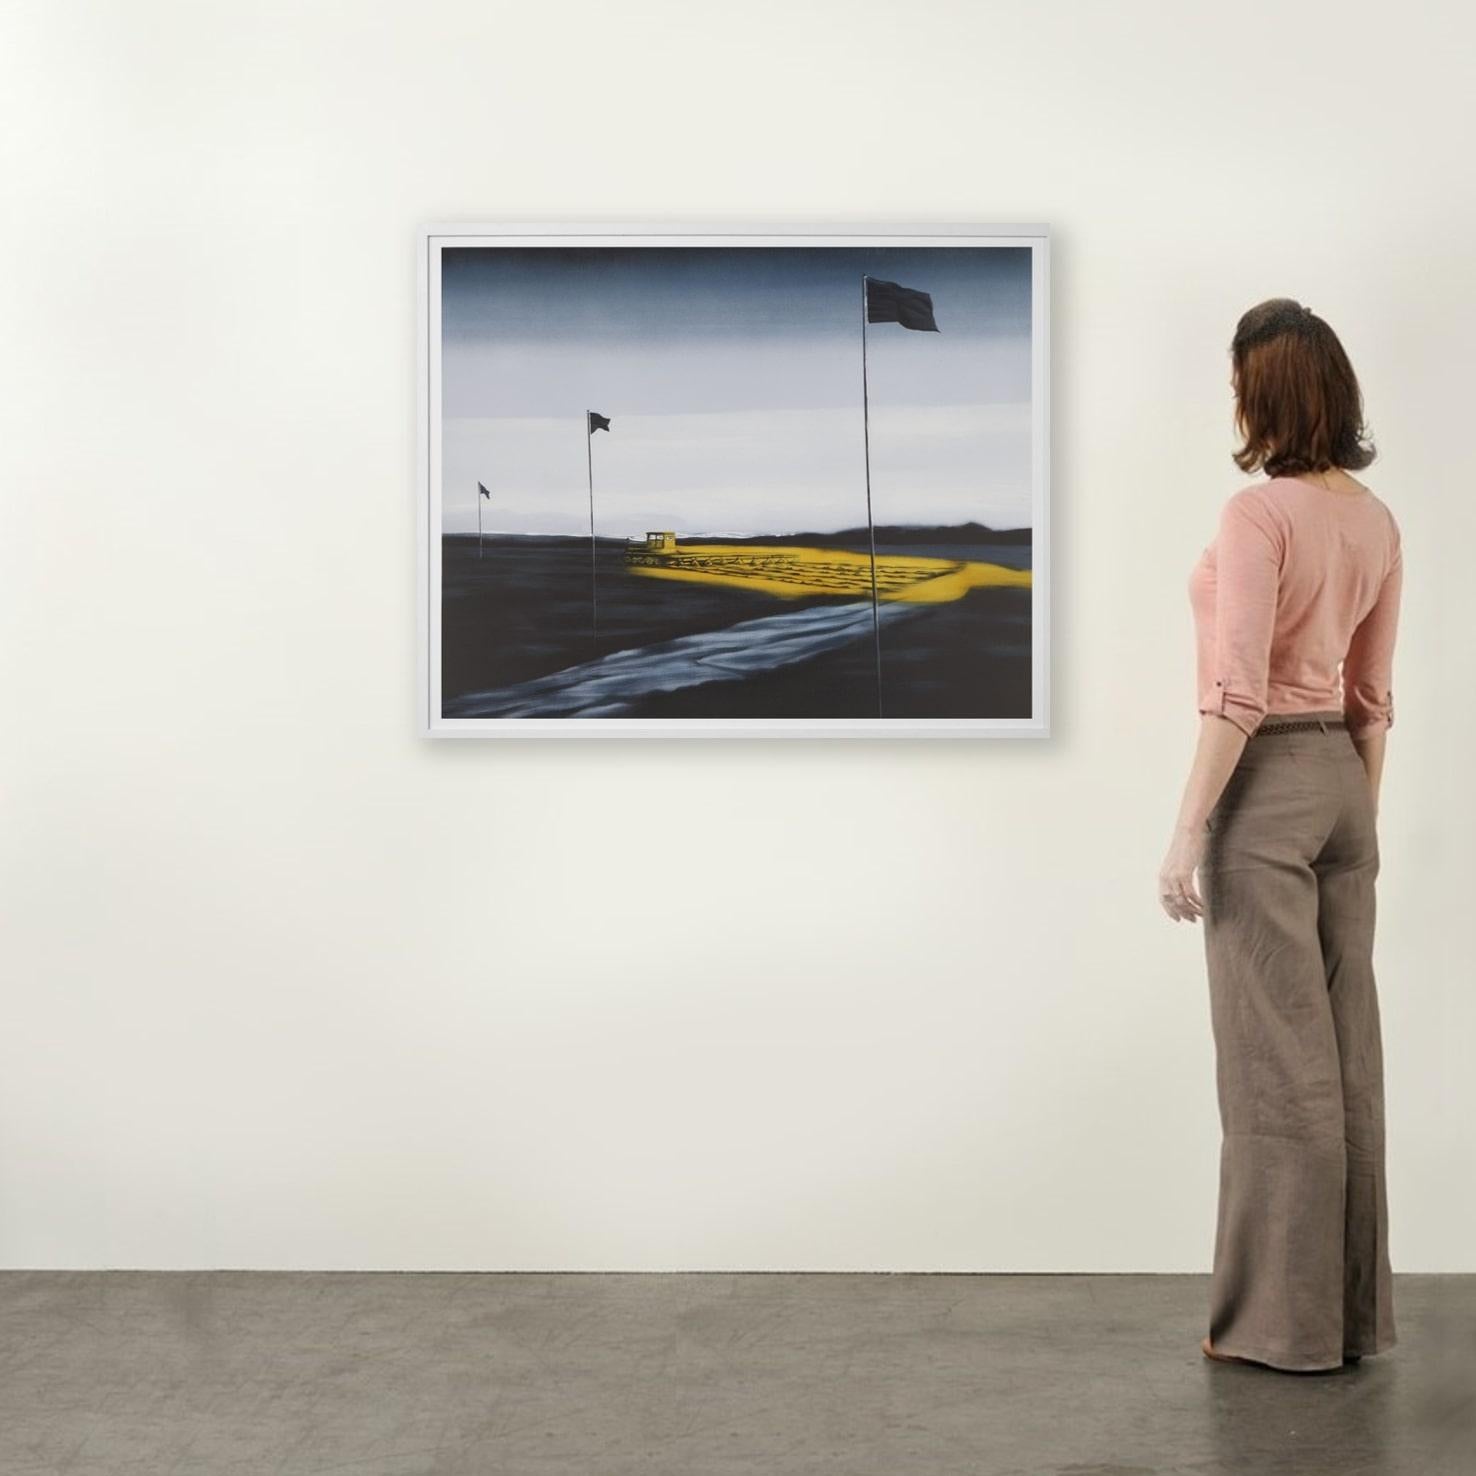 Zhang Xiaogang, Landscape
Contemporary, 21st Century, Lithography, Limited Edition, Chinese
Lithograph
Edition of 130
80 x 120 cm (31.5 x 47.2  in)
Signed and numbered, accompanied by Certificate of Authenticity
In mint condition, as acquired from